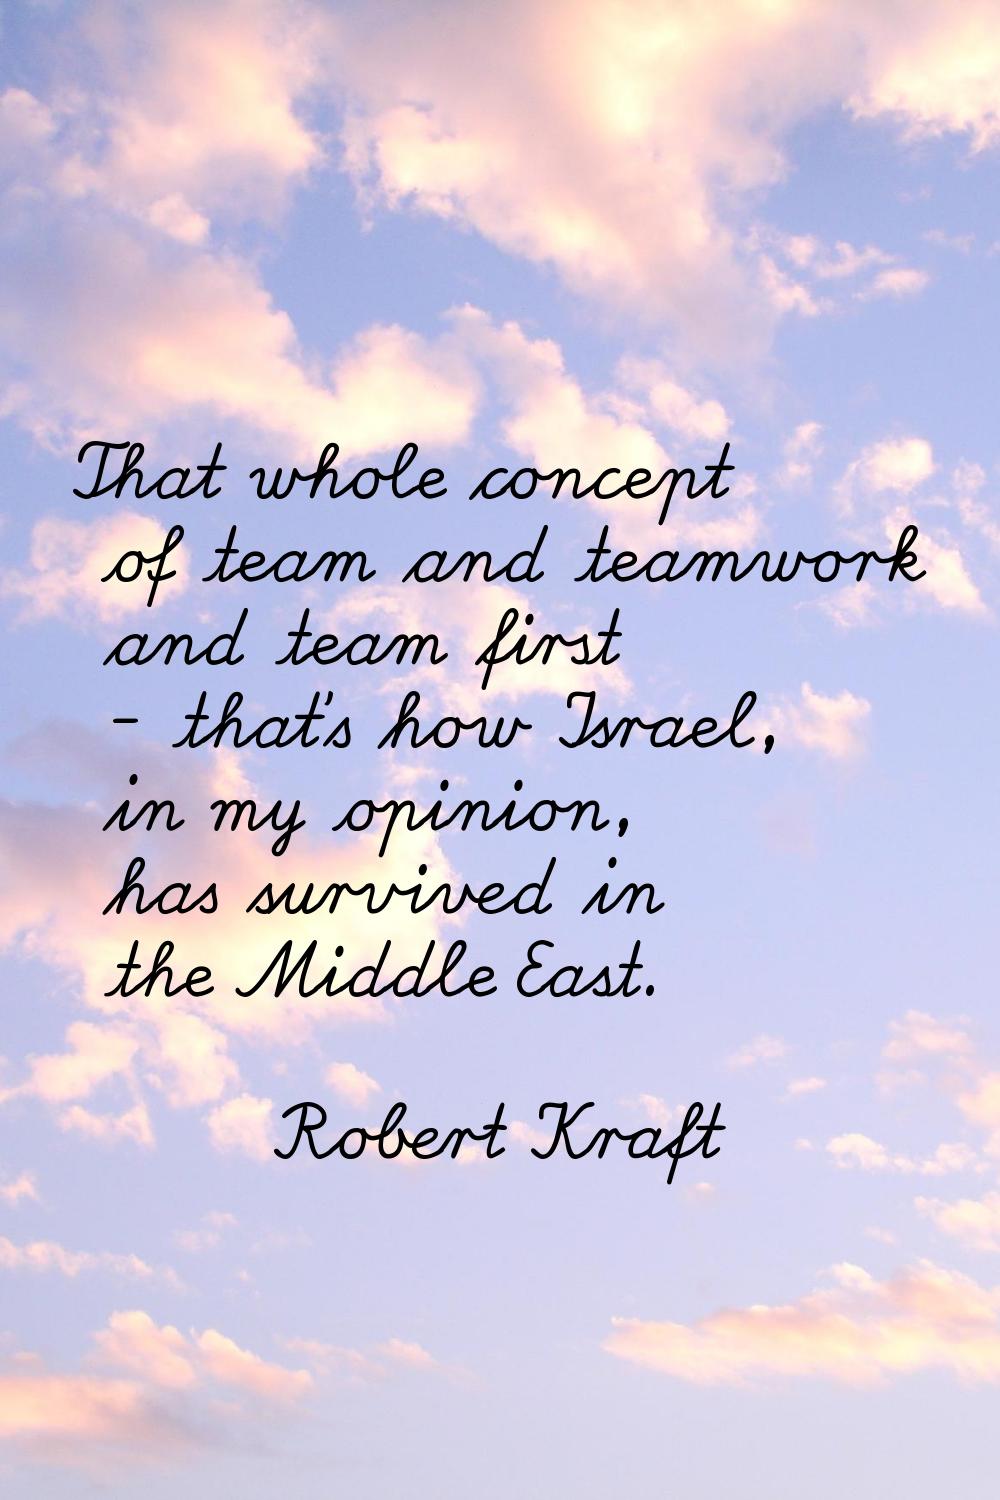 That whole concept of team and teamwork and team first - that's how Israel, in my opinion, has surv